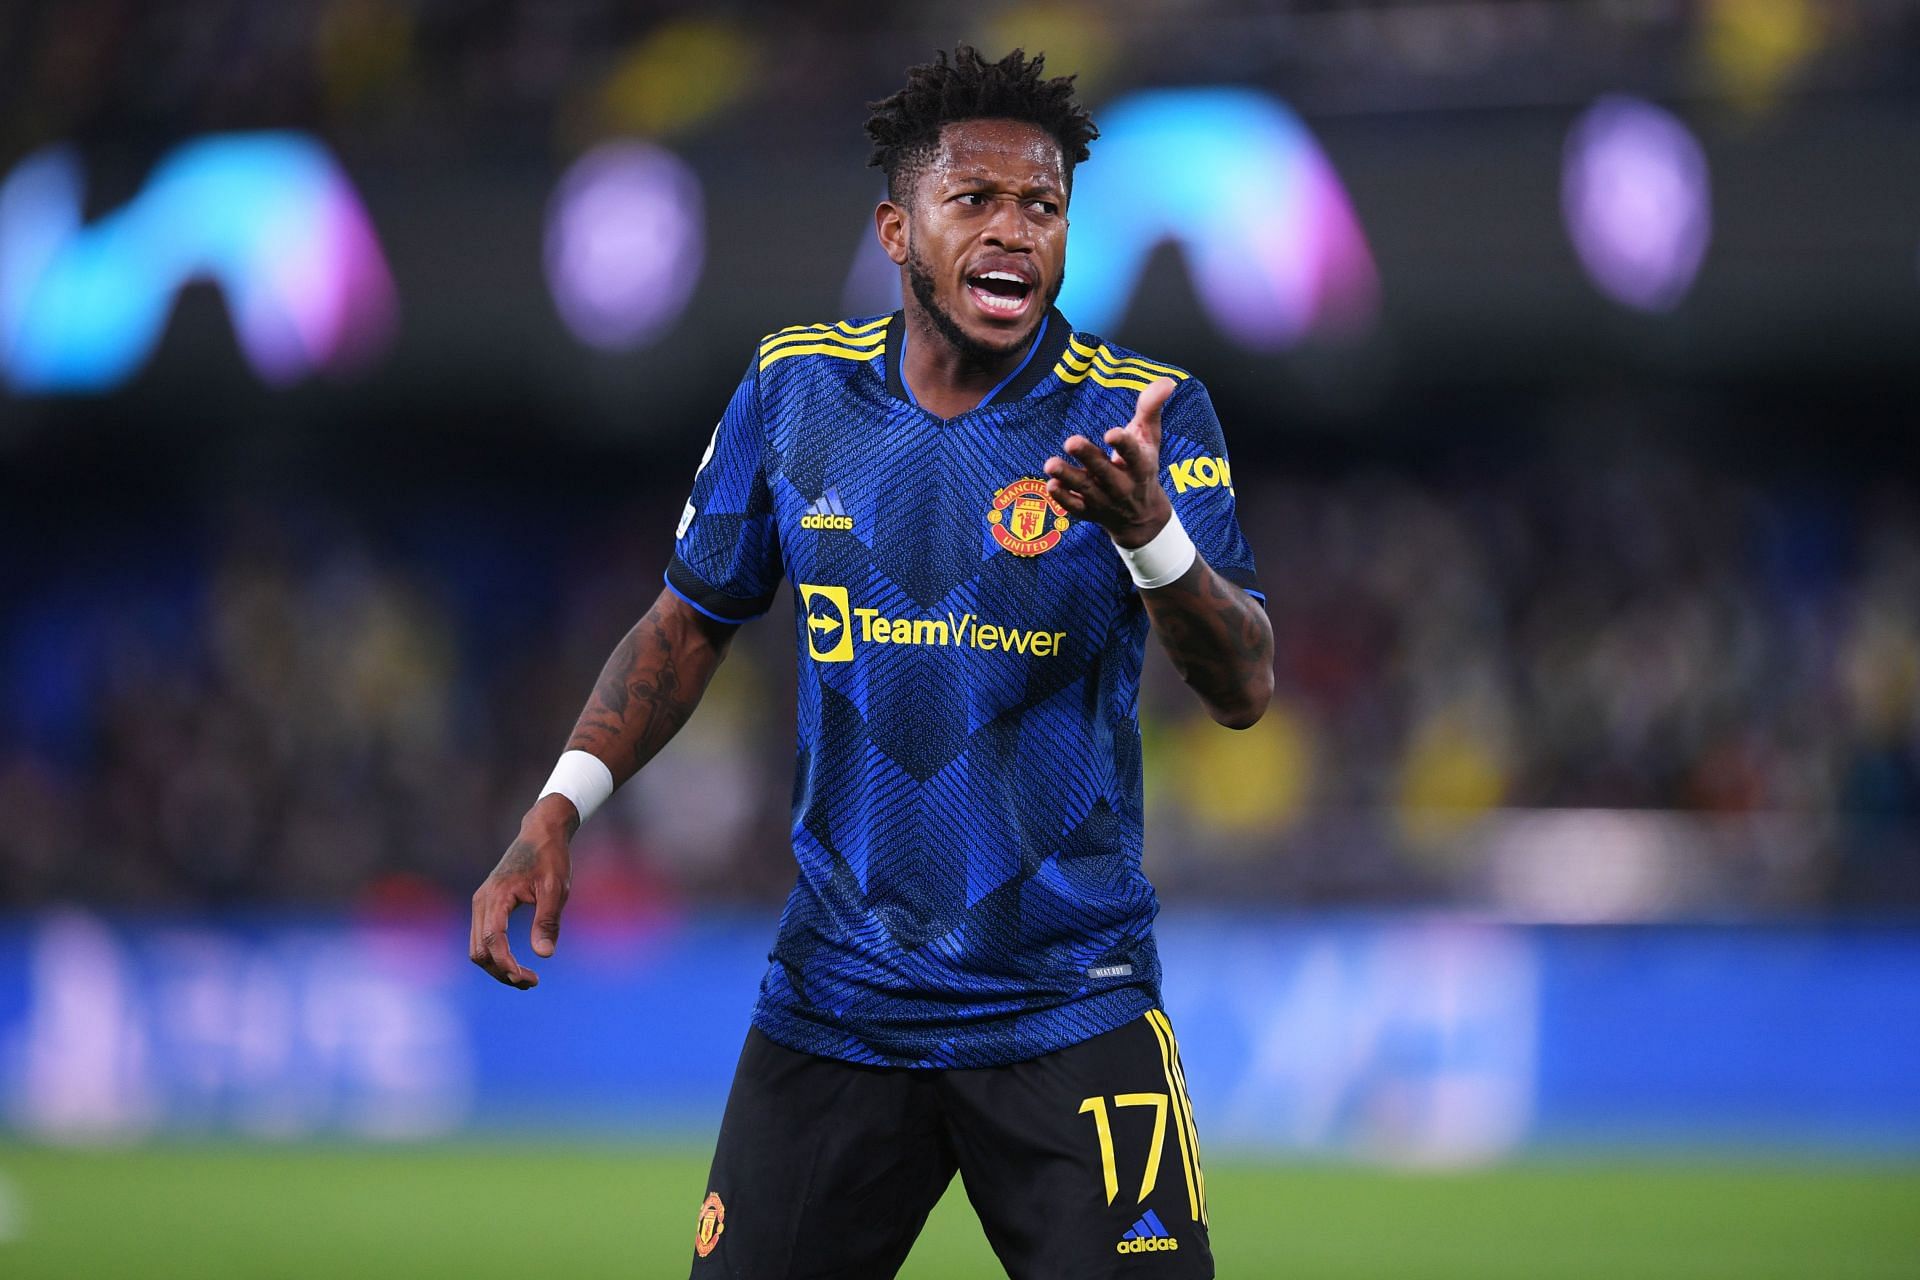 Fred has blown hot and cold for Manchester United for majority of his tenure